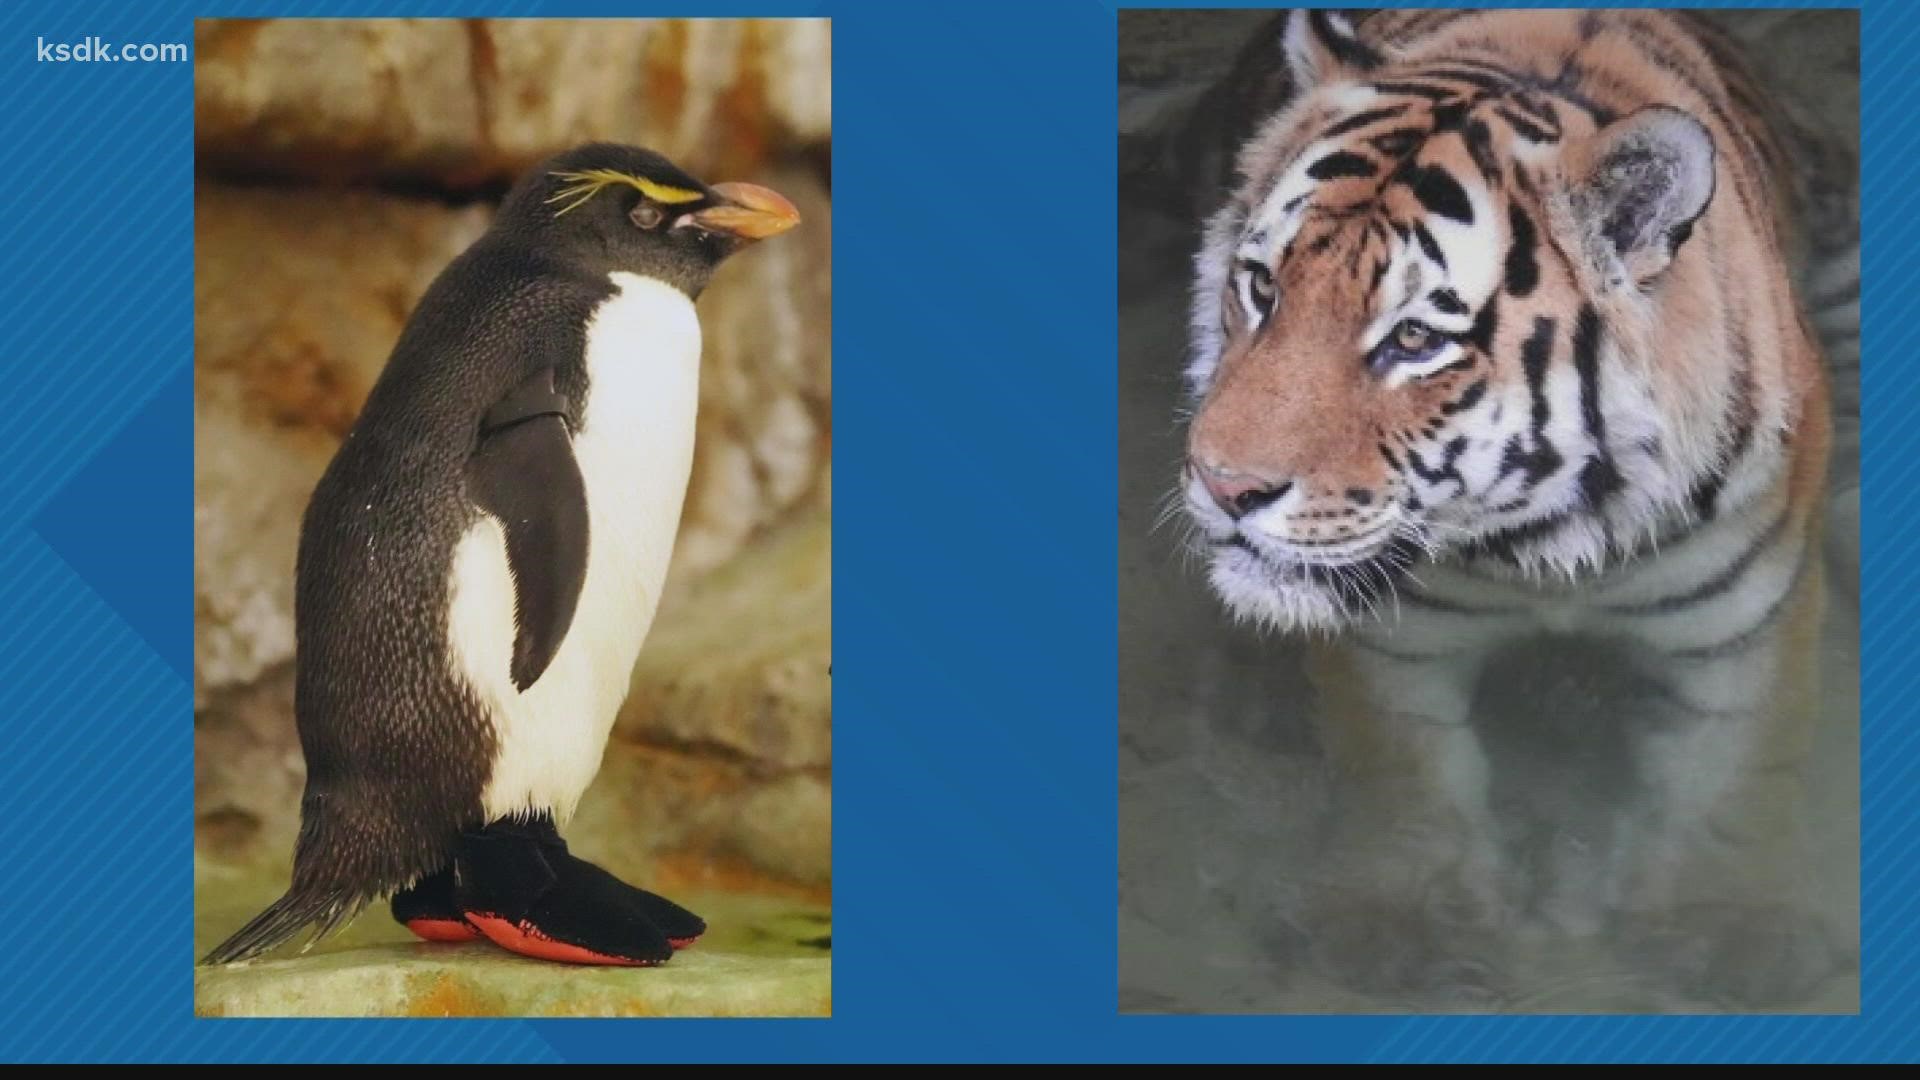 Amur tiger Waldemere and southern rockhopper penguin Enrique were both in their golden years, the zoo said, and were loved by keepers and visitors.